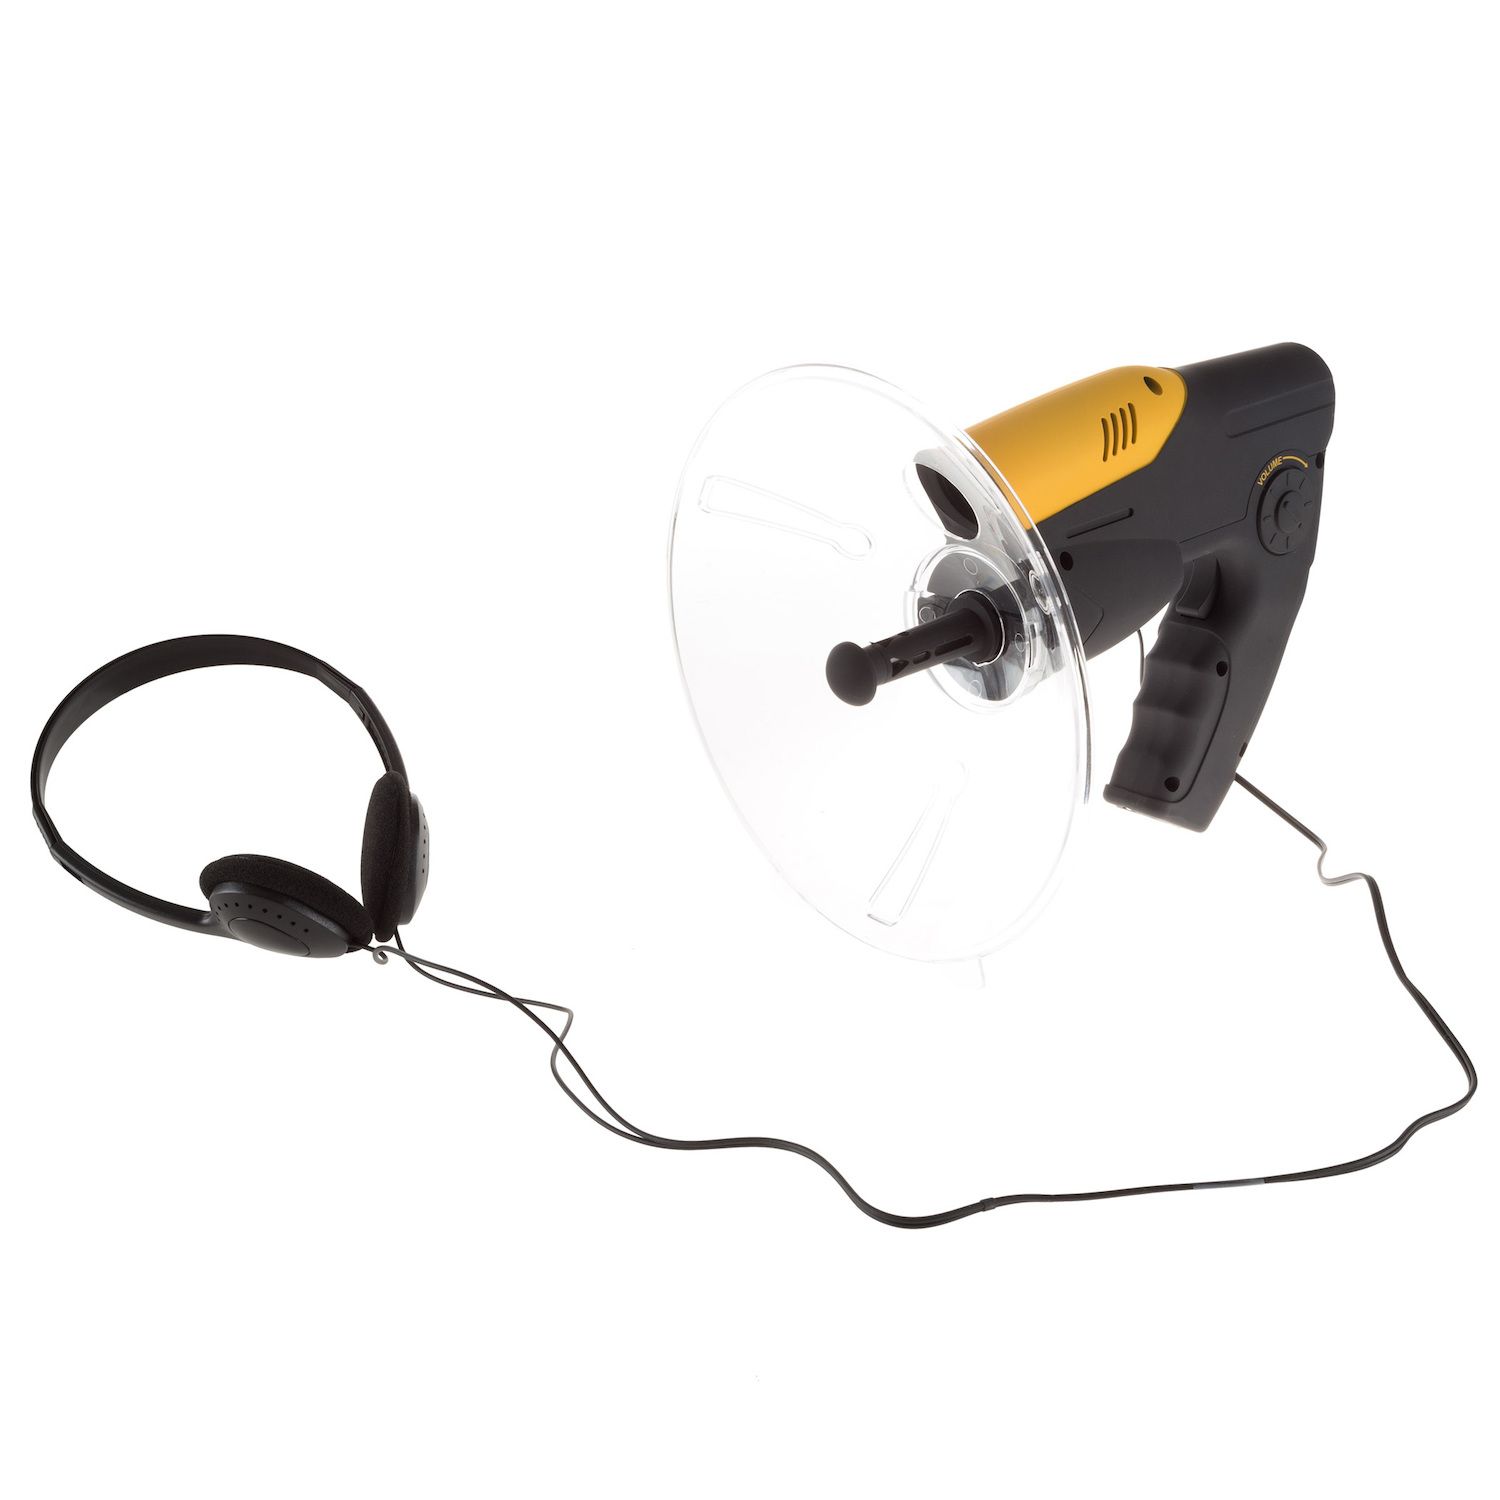 Image for Hey! Play! Electronic Listening Device Hearing Dish with Headphone at Kohl's.